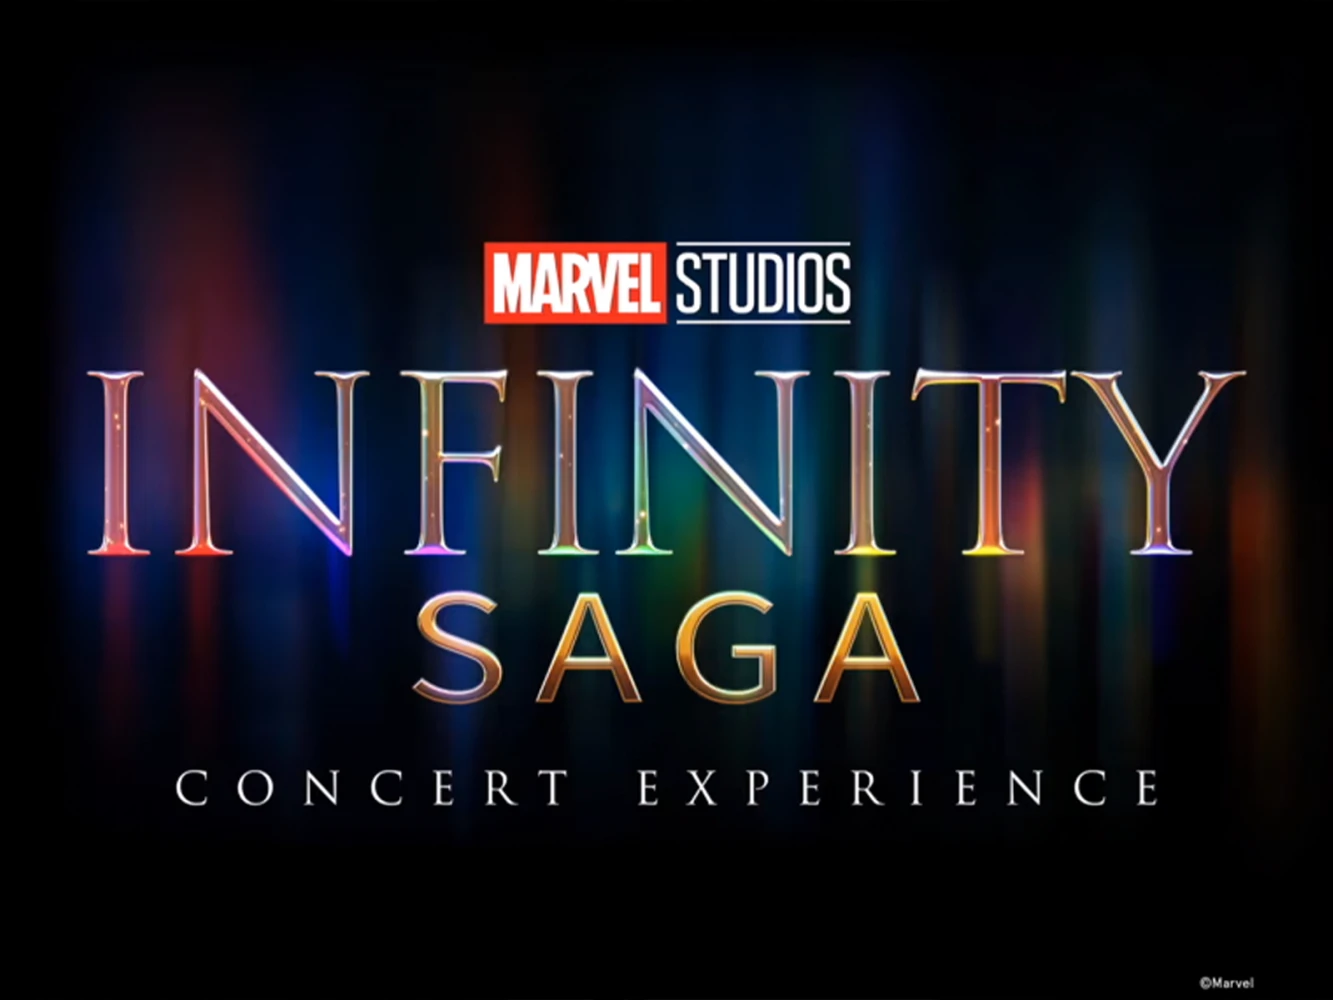 Marvel Studios’ Infinity Saga Concert Experience: What to expect - 1